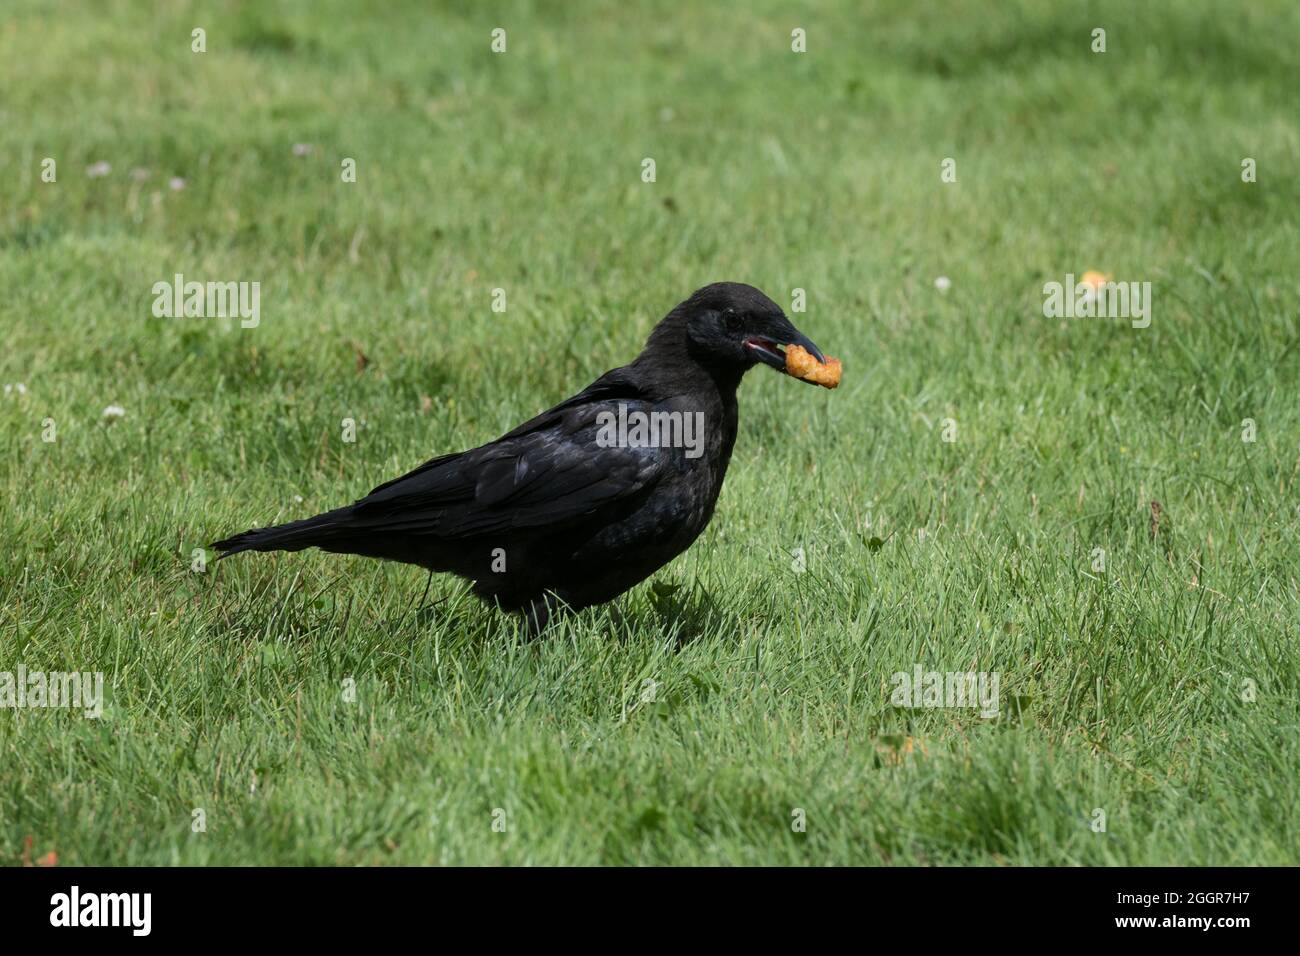 A crow in Myrtle Edwards Park eating a tater tot. Stock Photo